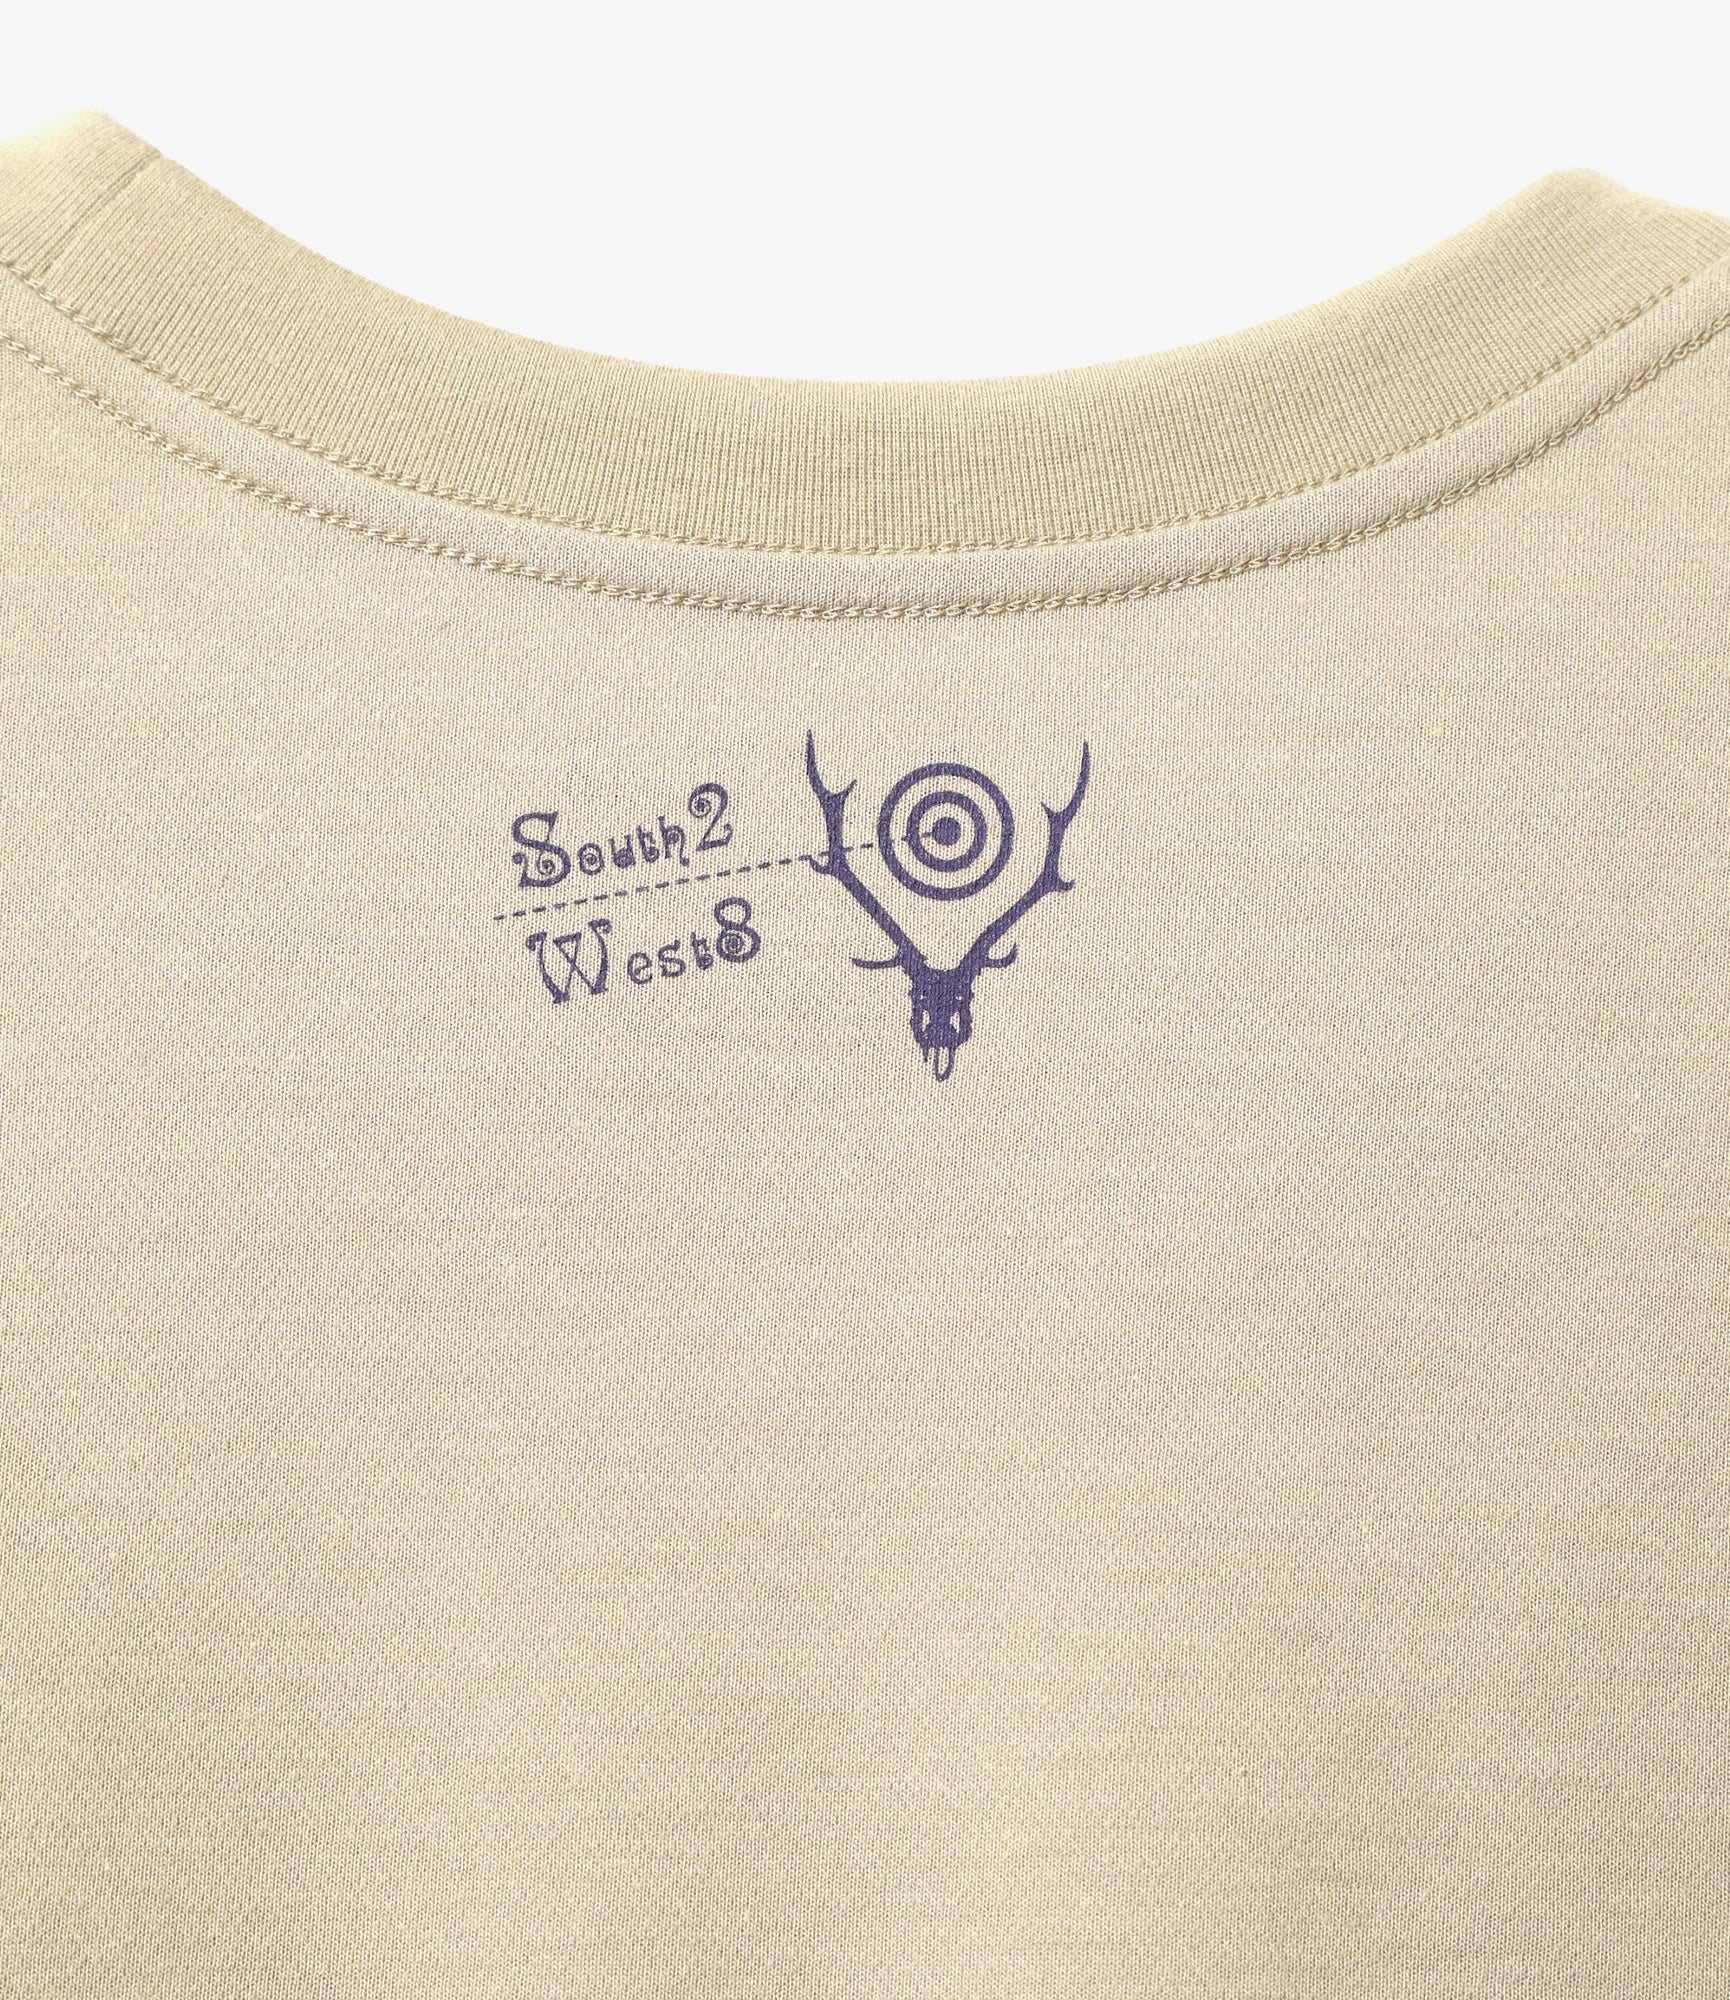 South2 West8 Crew Neck Tee - IMAGE IS IMPORTANT - Grey